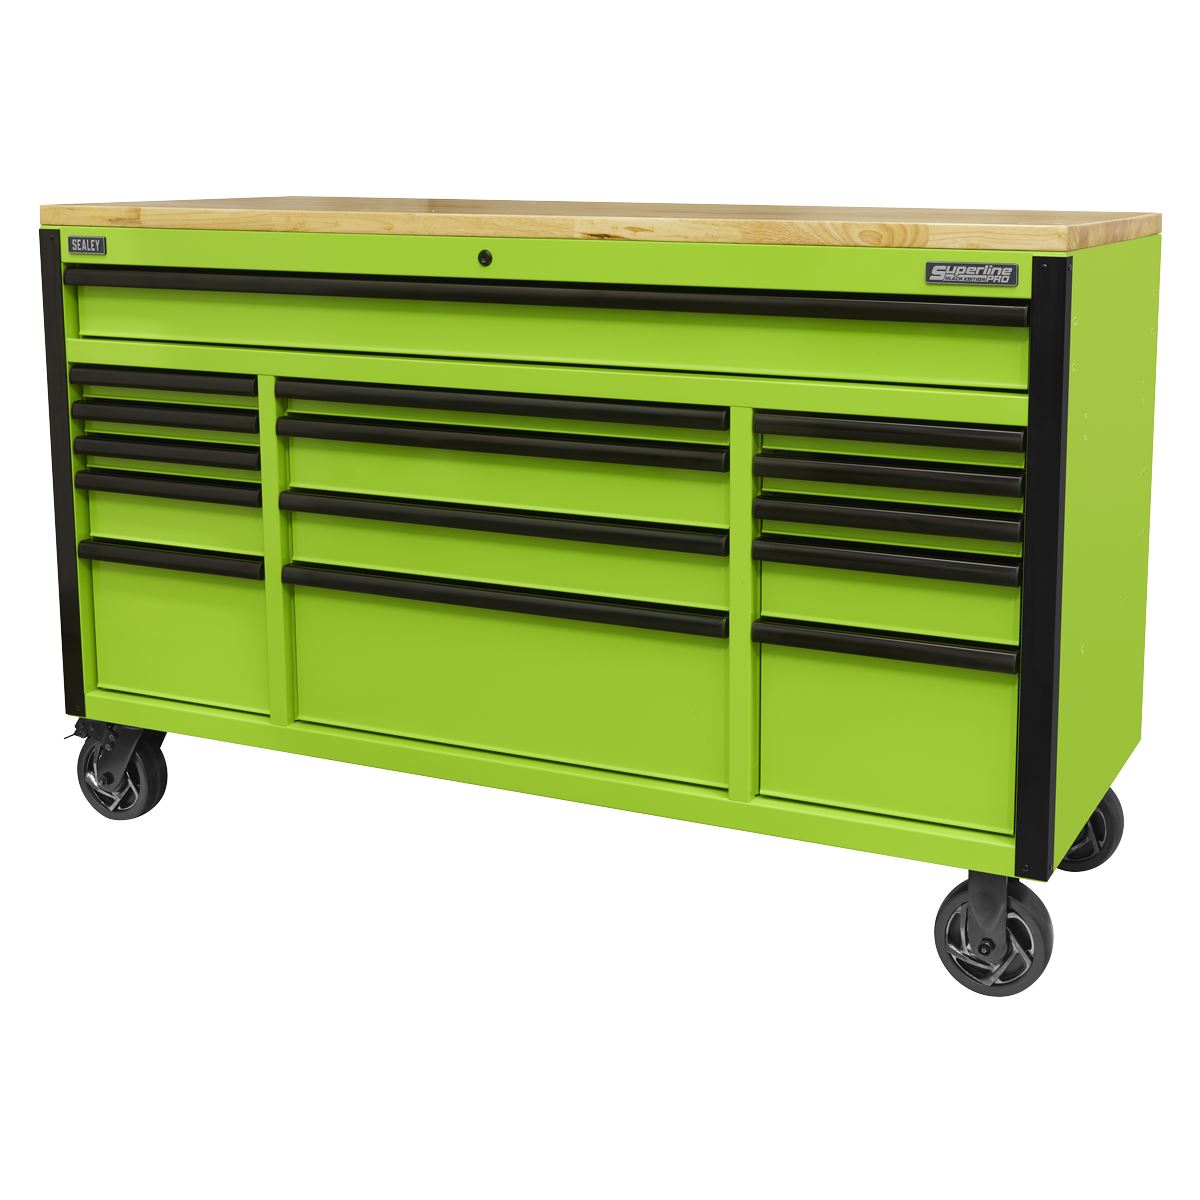 Sealey 15 Drawer Mobile Trolley with Wooden Worktop 1549mm AP6115BE